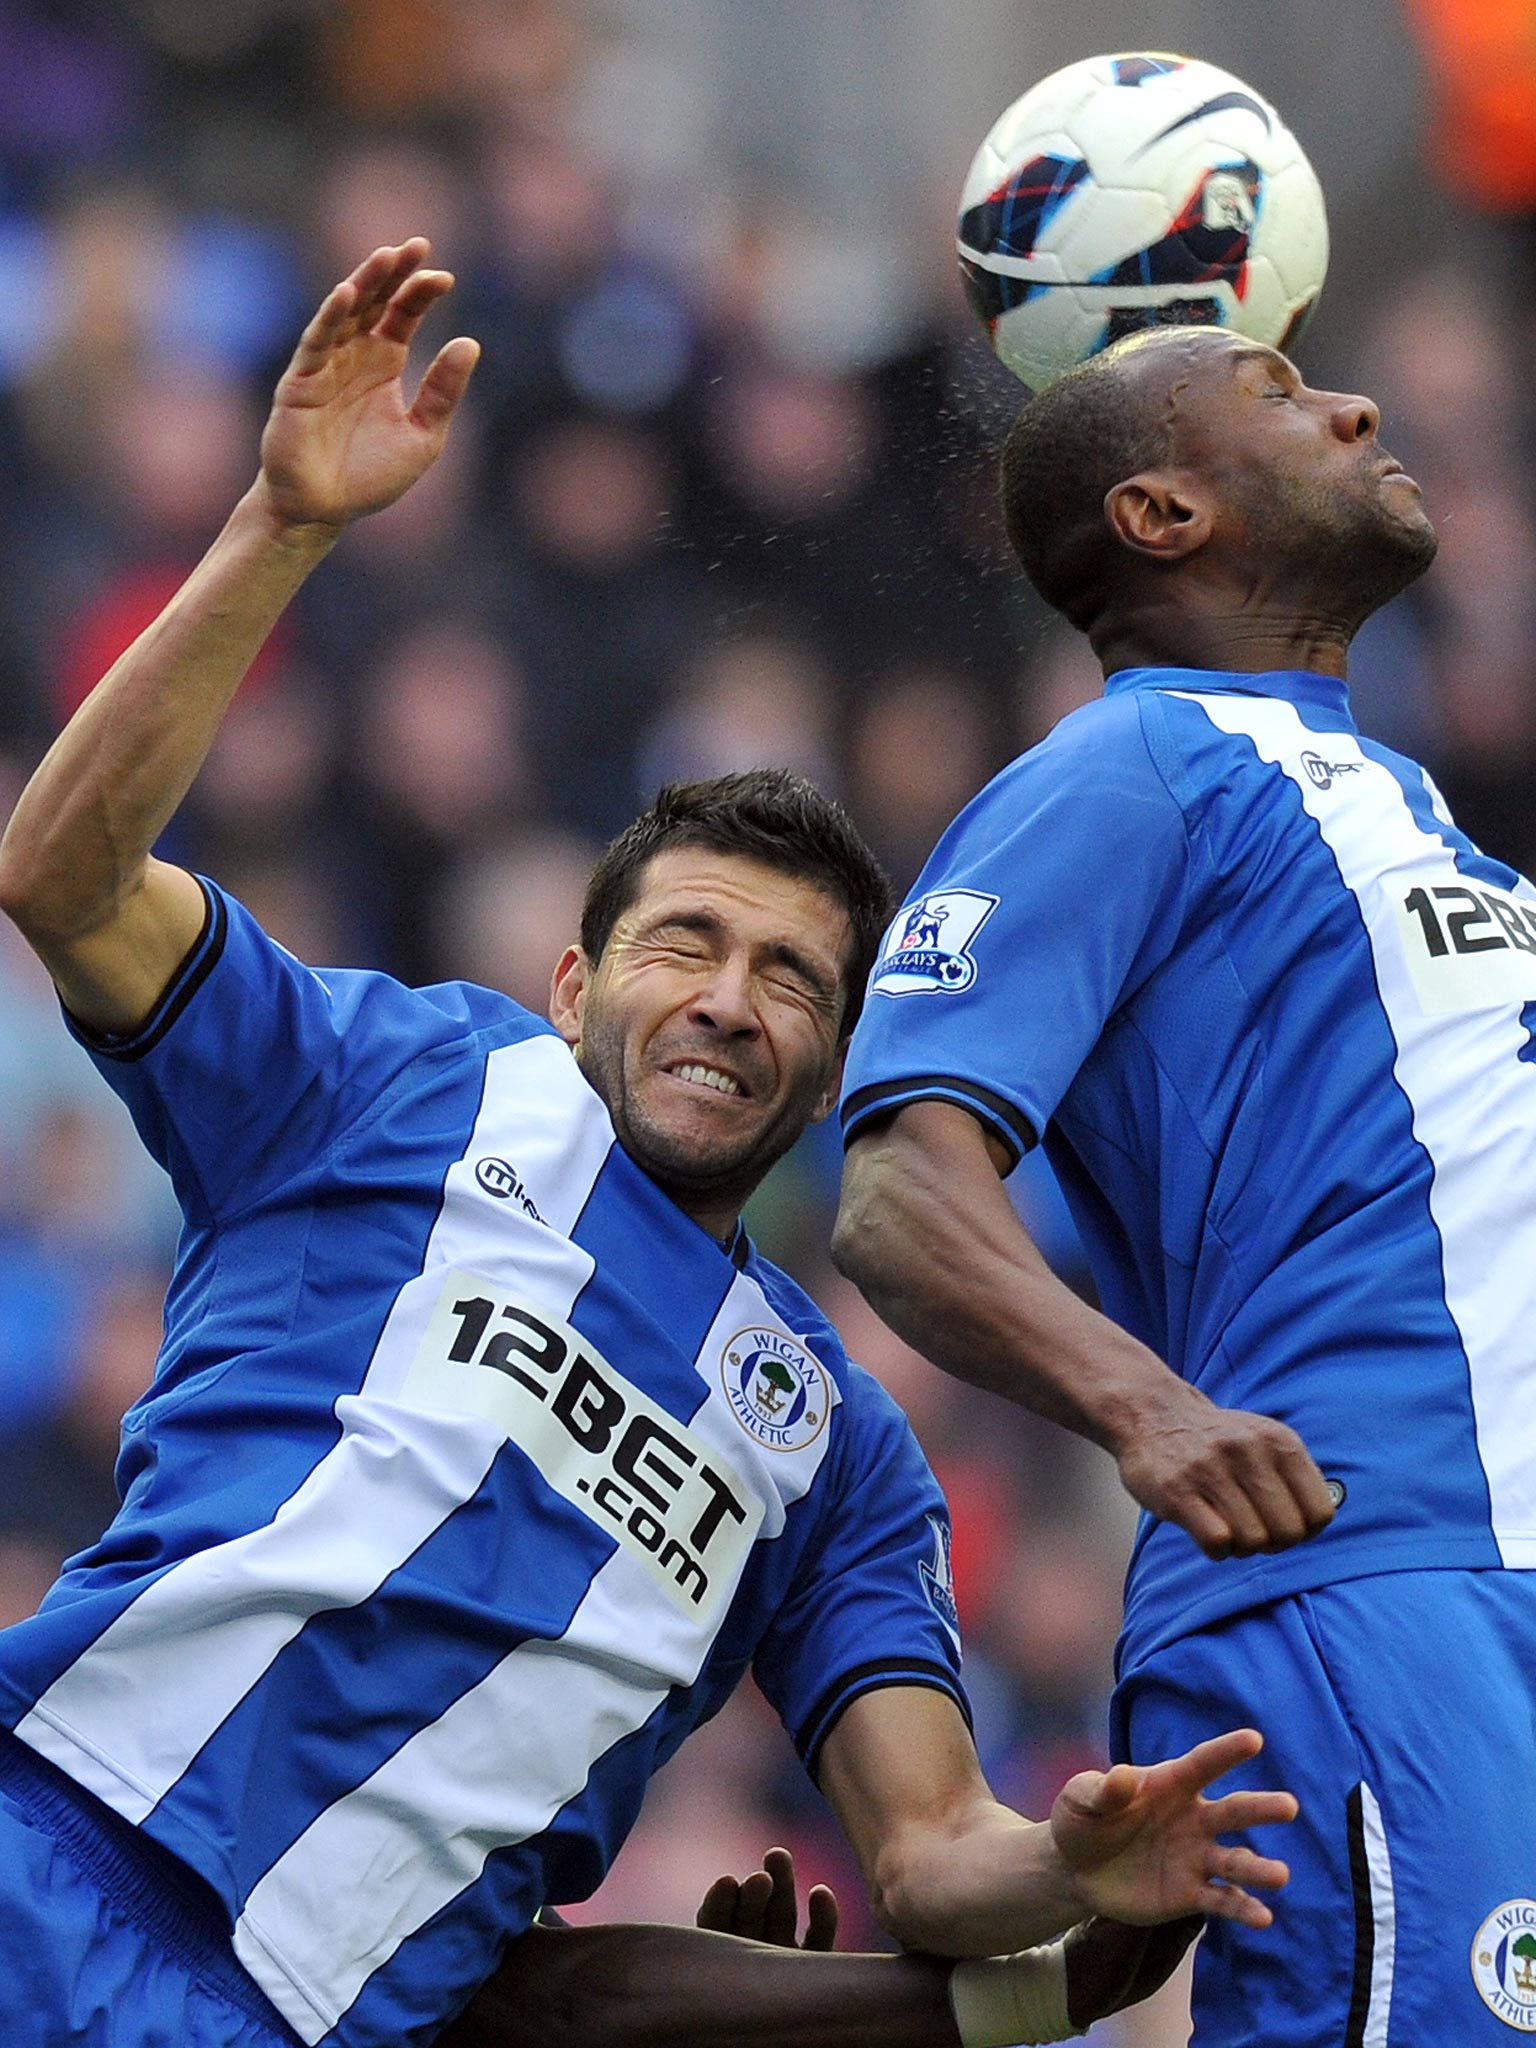 Wigan Athletic's Paraguayan defender Antolin Alcaraz (left) jumps for the ball with Barbadian defender Emmerson Boyce